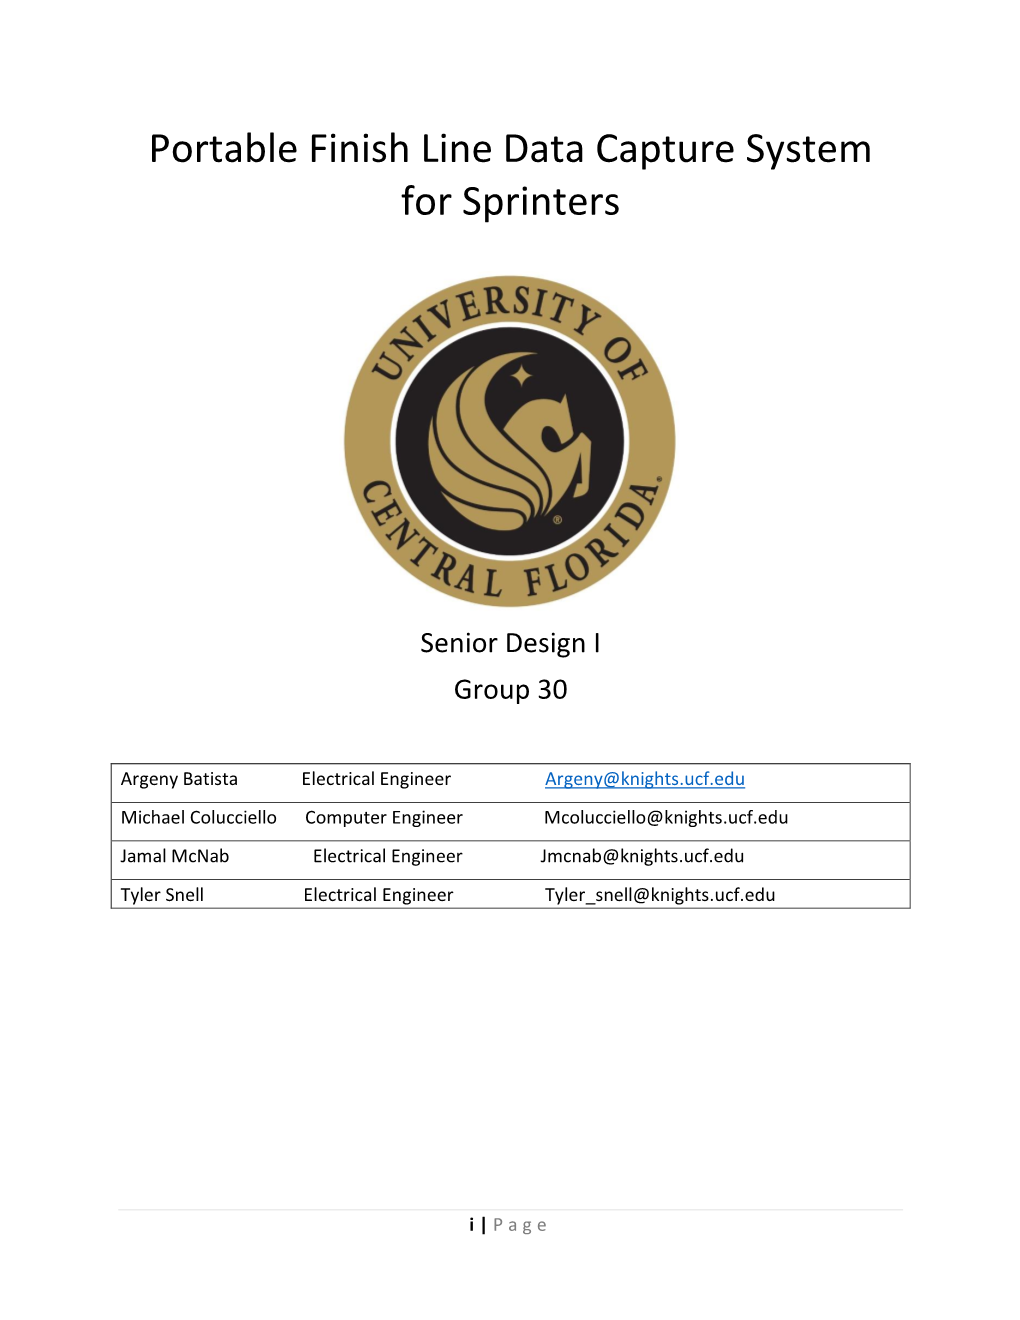 Portable Finish Line Data Capture System for Sprinters